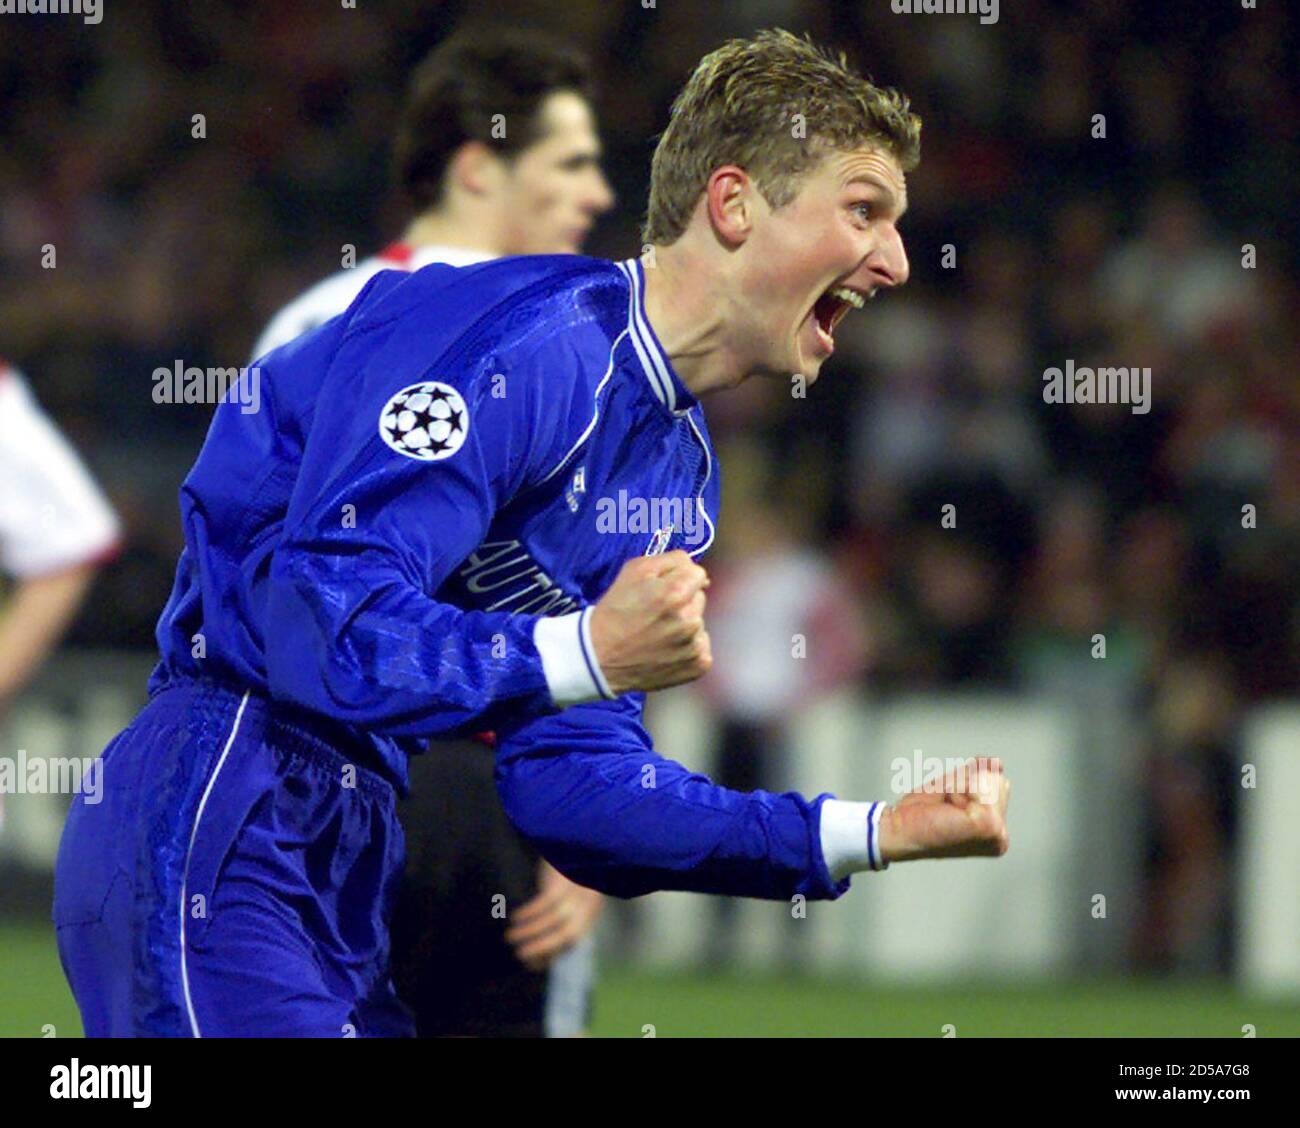 Chelsea's Norwegian striker Tore Andre Flo celebrates scoring against  Feyenoord during their UEFA Champions League Group D match at the De Kuip  Stadium in Rotterdam March 14. AS/CLH Stock Photo - Alamy